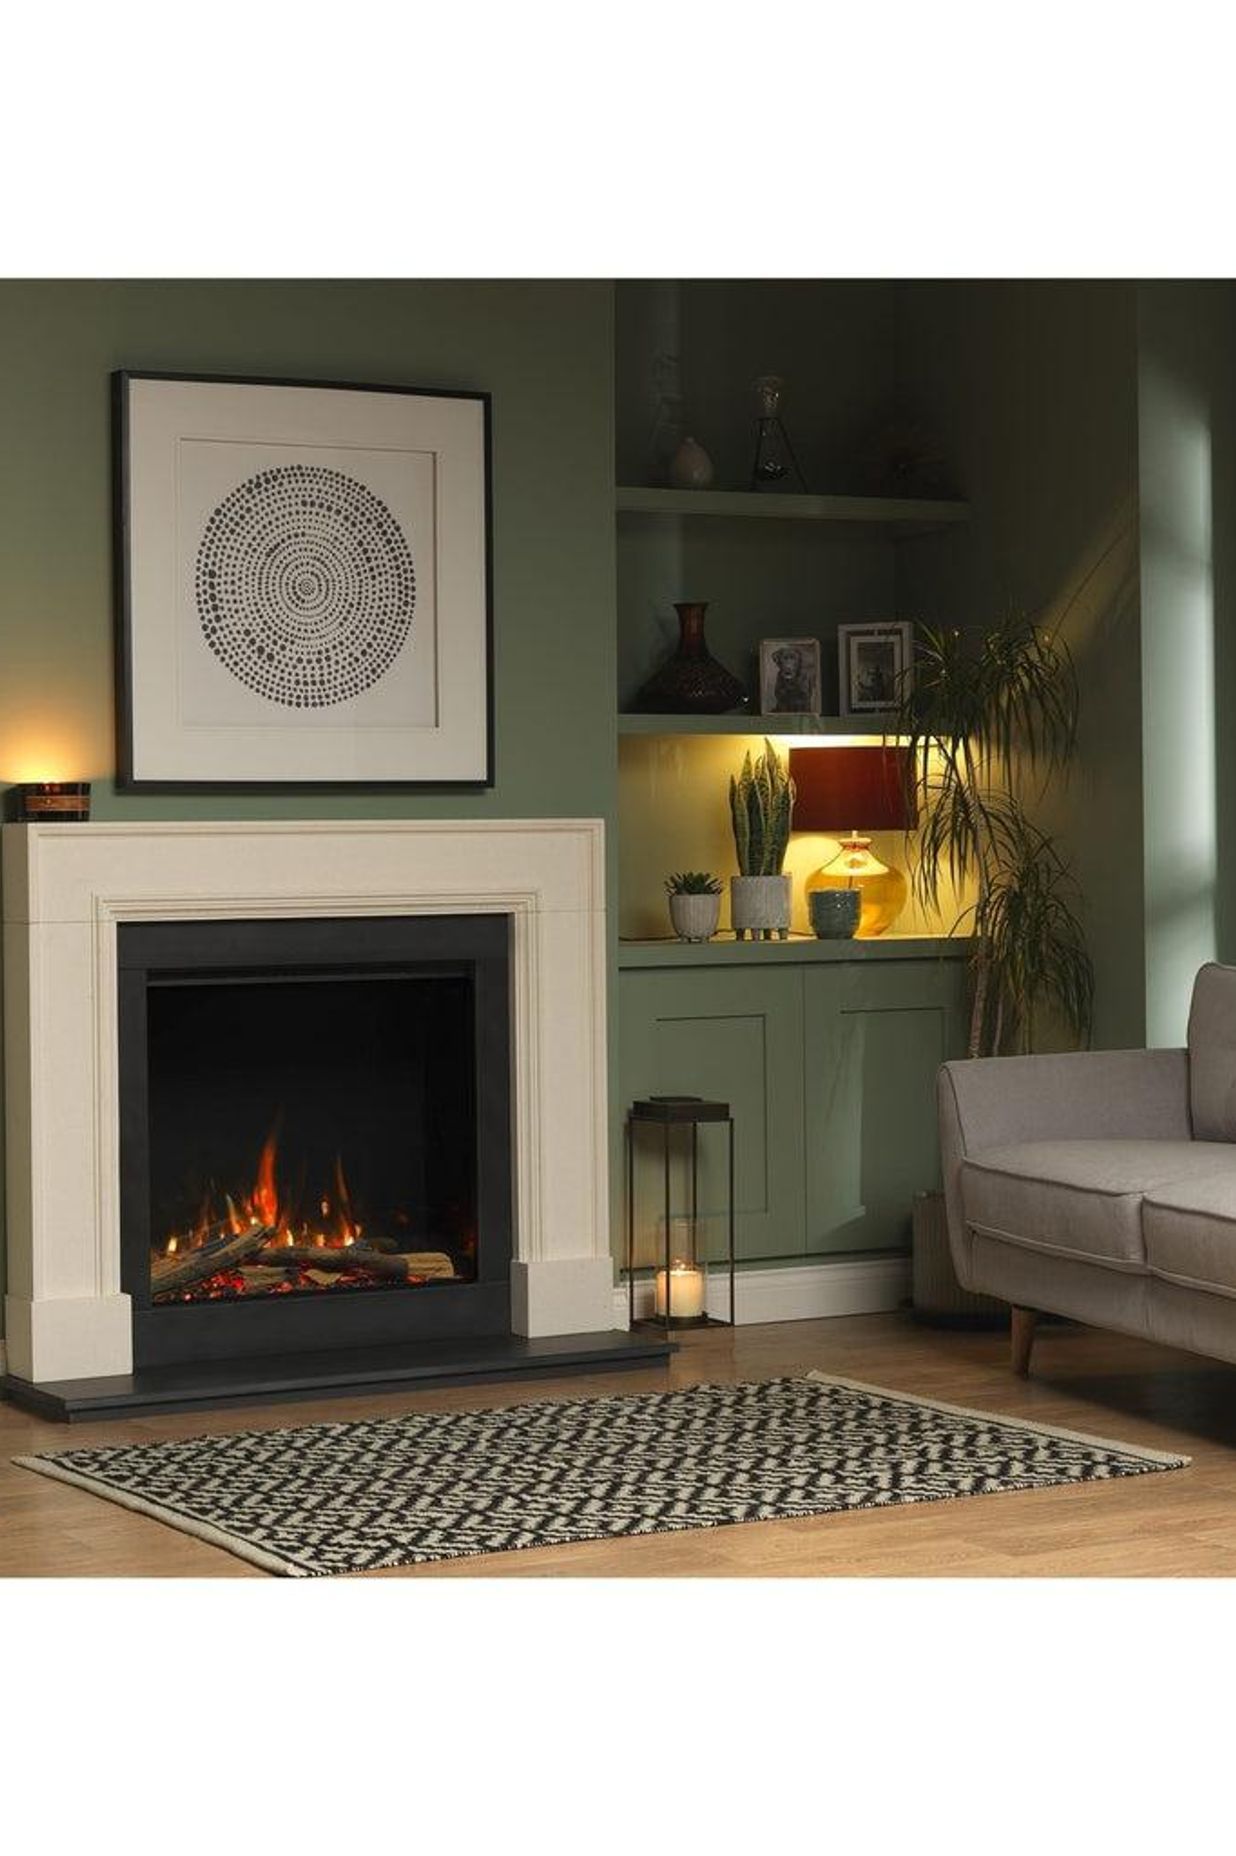  Electric fireplaces offer warmth without the regular upkeep of traditional fires, but still retain the special atmosphere a lit fire creates.